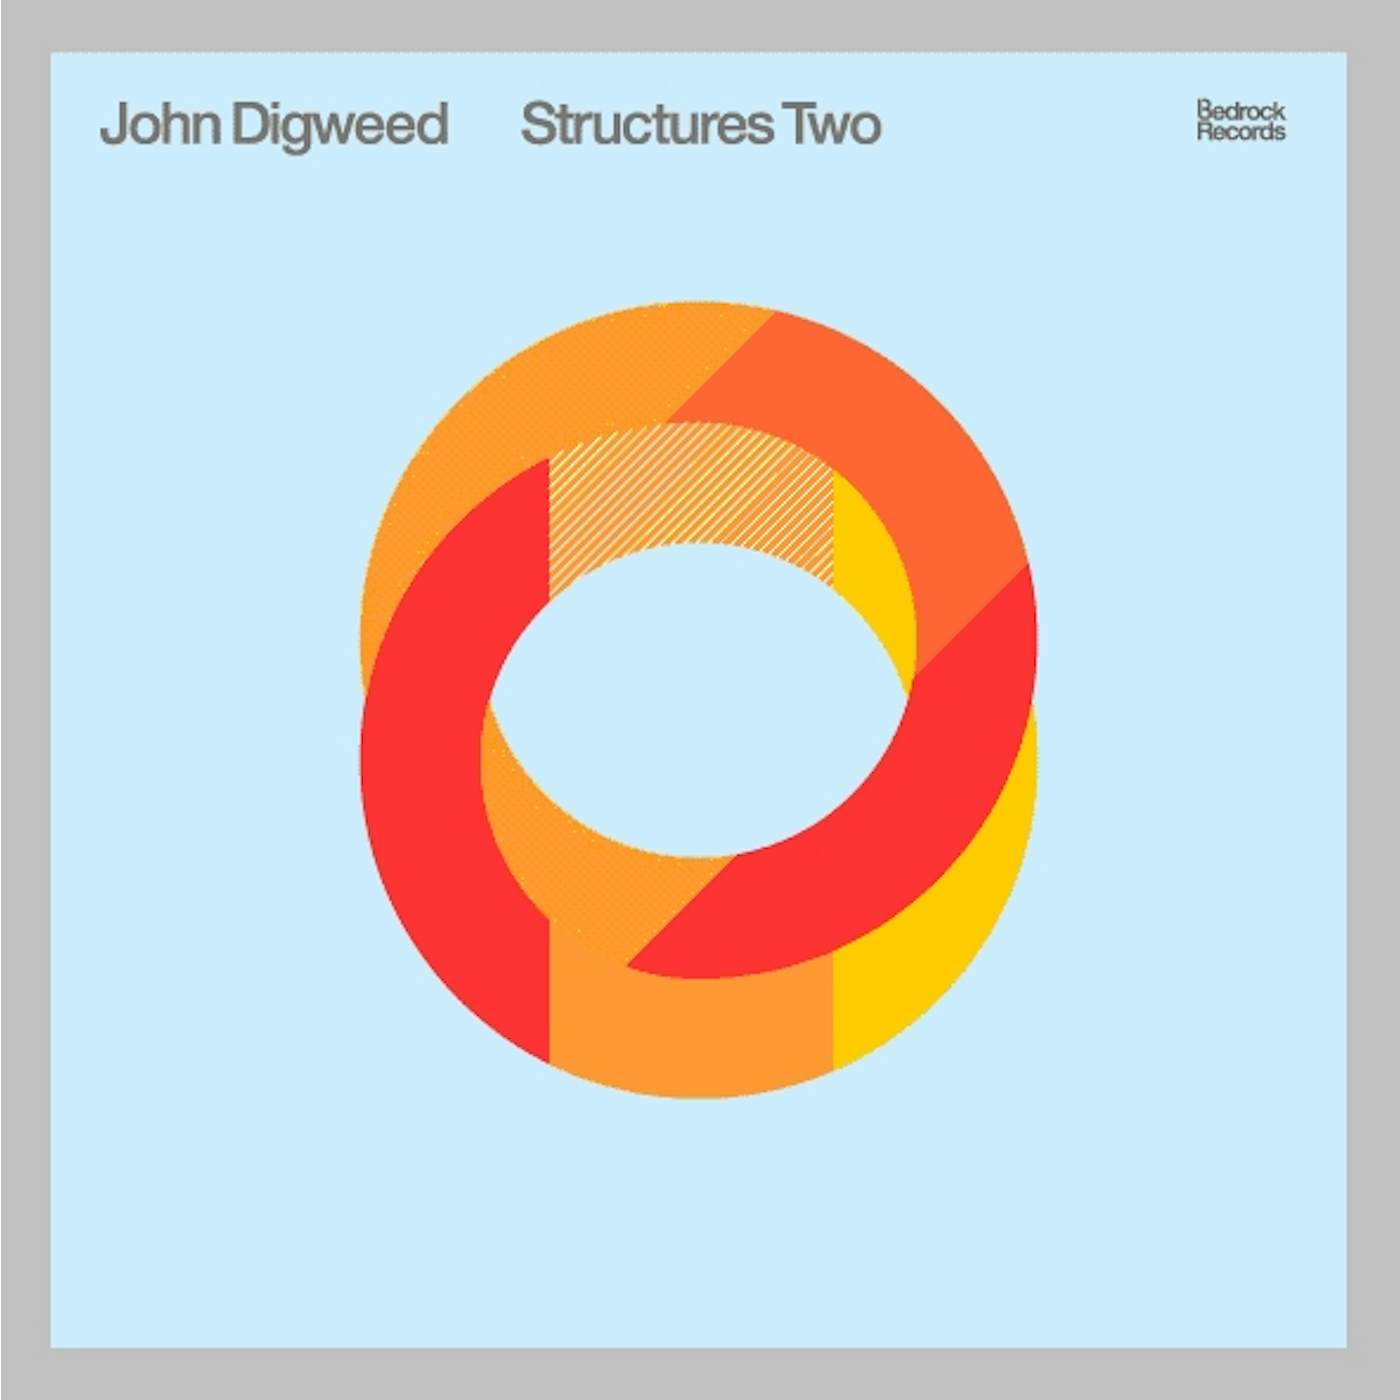 John Digweed STRUCTURES TWO CD